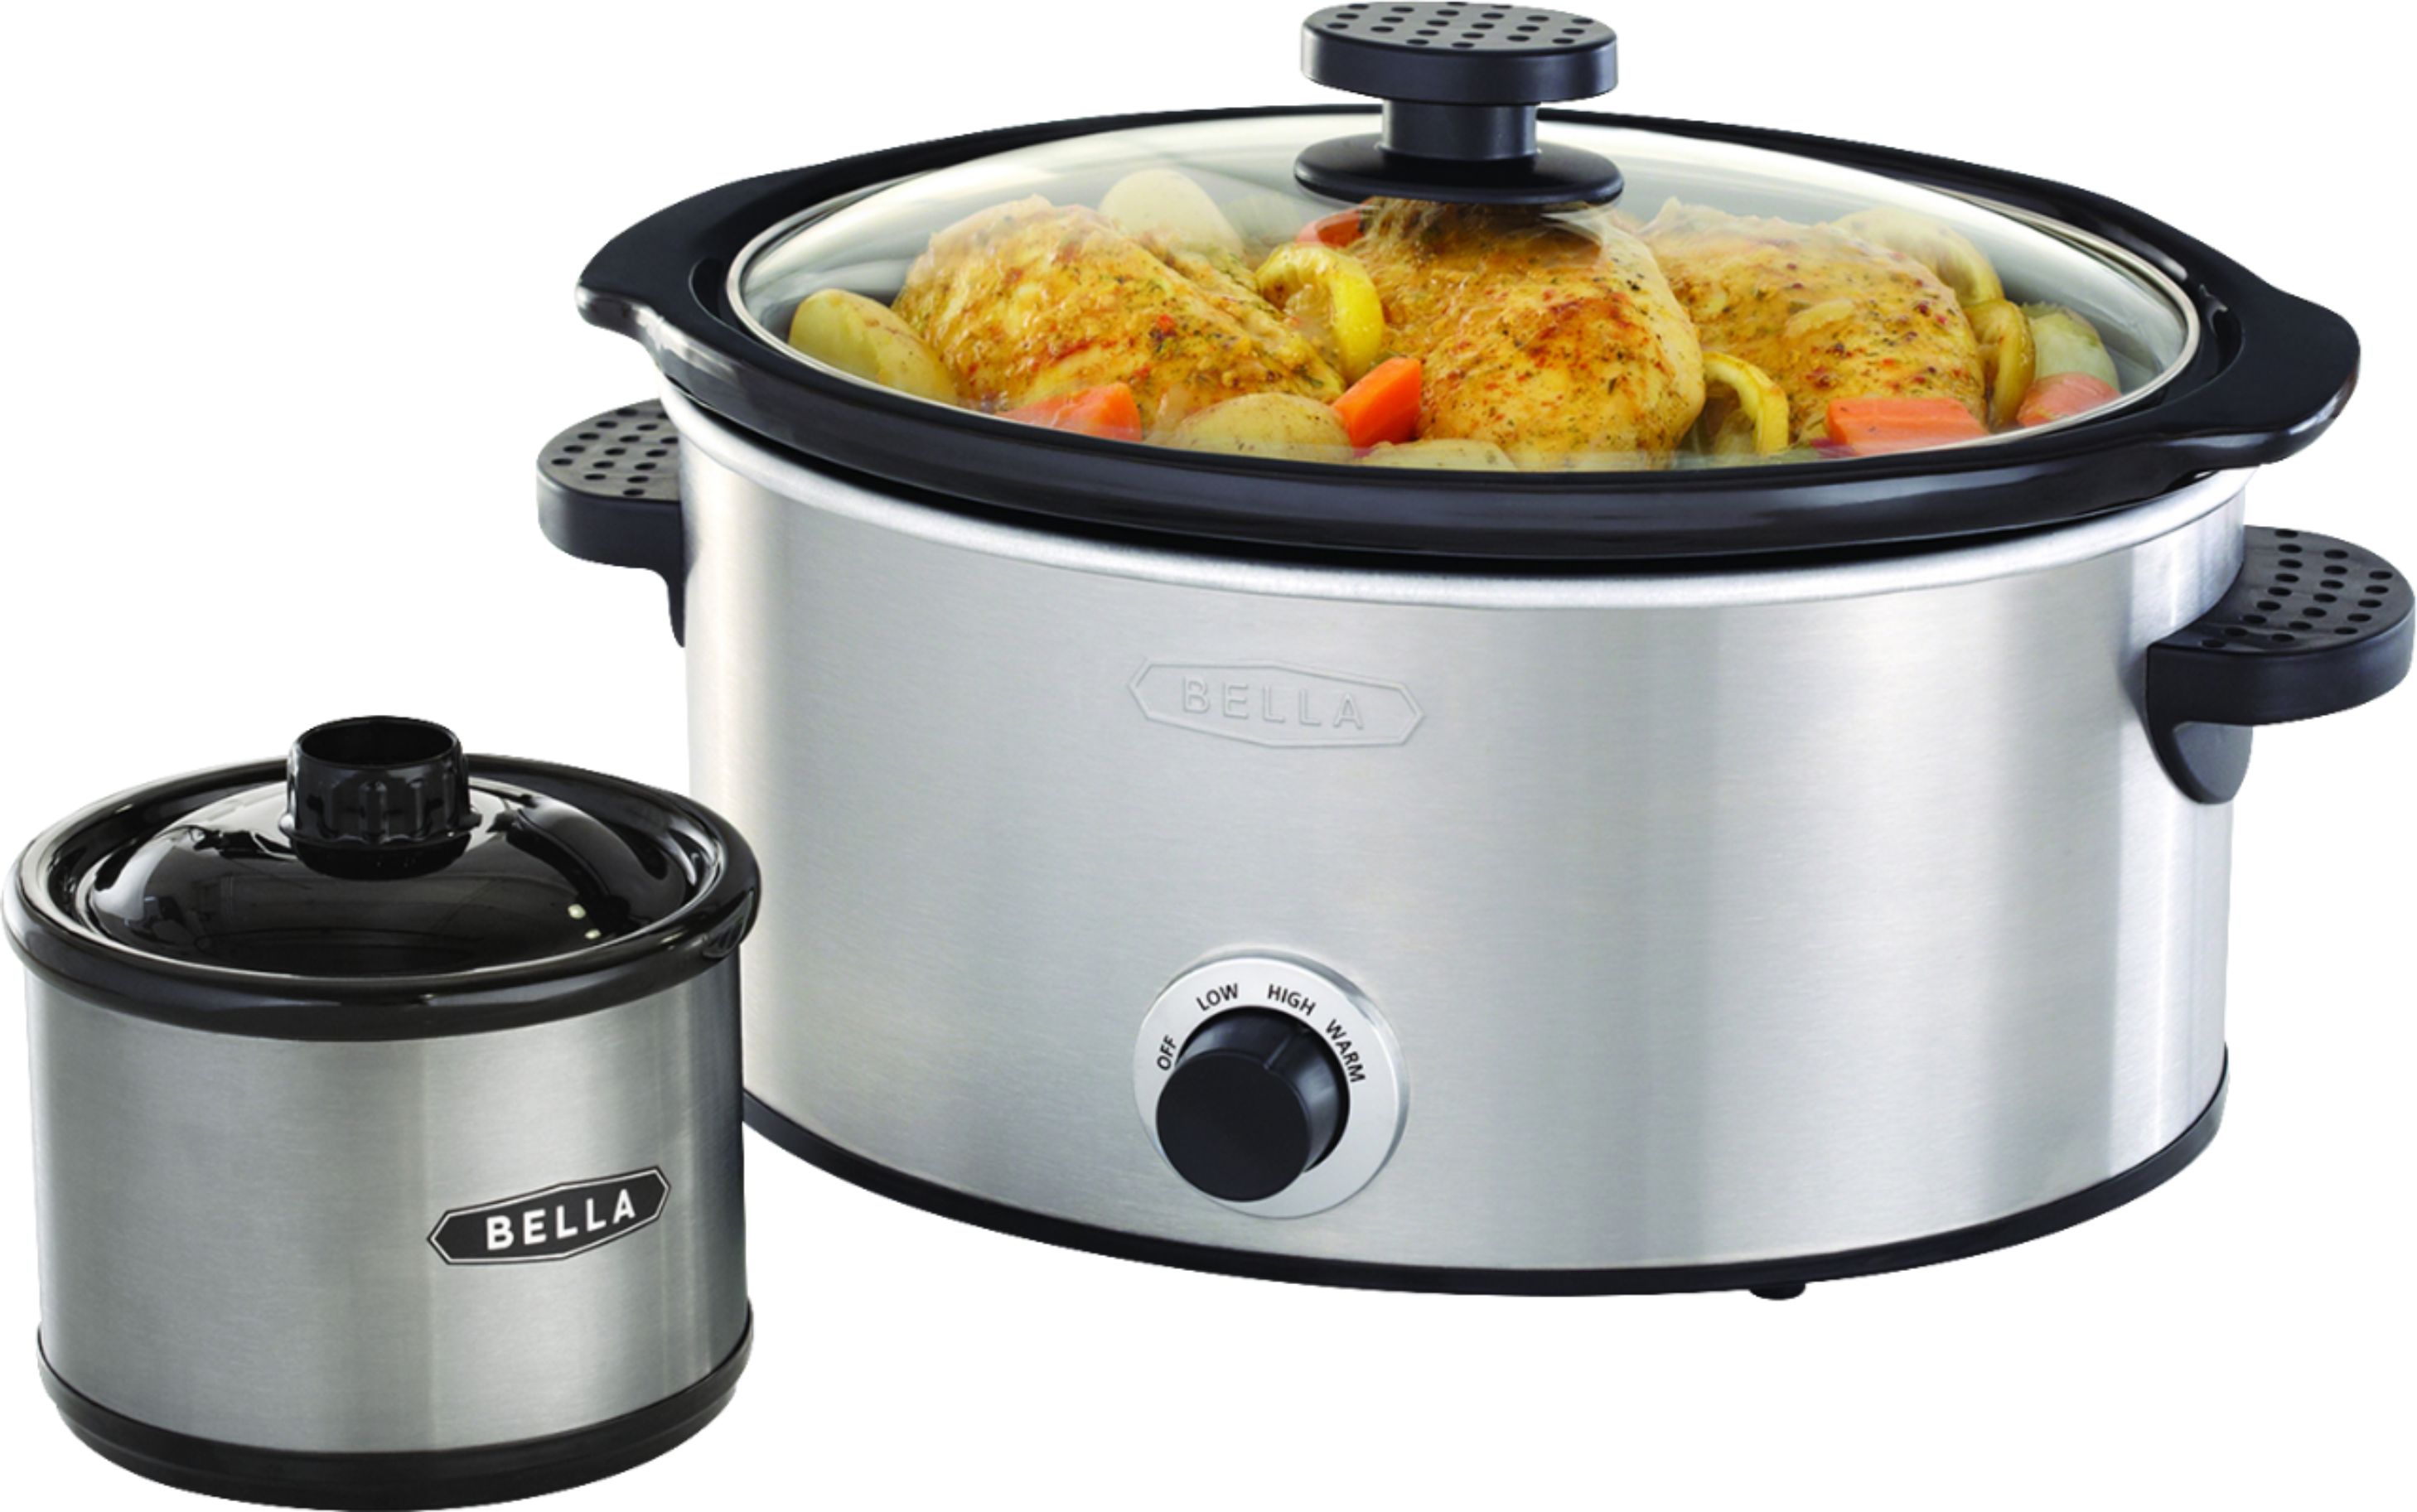 Zoom in on Angle Zoom. Bella - 5-qt. Slow Cooker with Dipper - Stainless Steel.